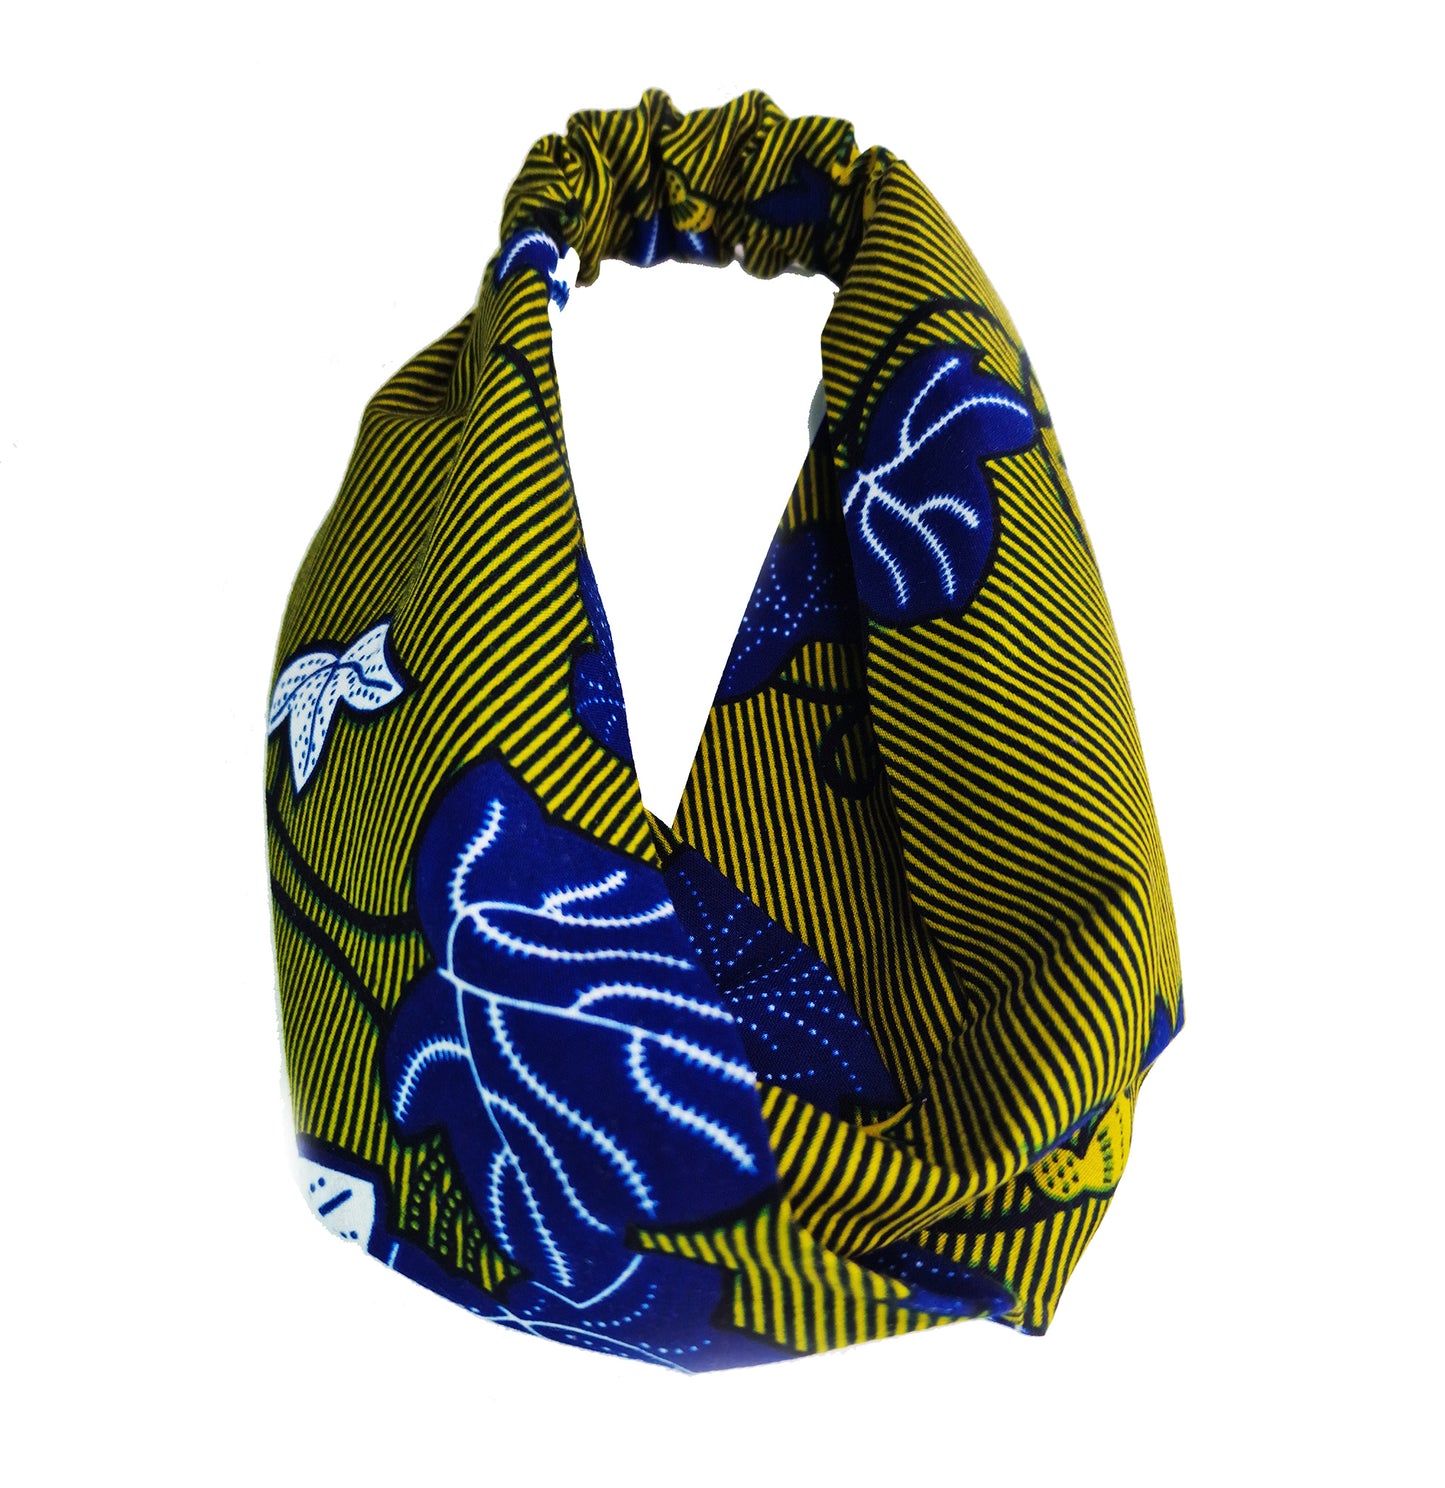 African Print Fabric Handmade Top Knot Headband Green Ankara Cotton Elasticated Stretchy Wide Large by Dovetailed